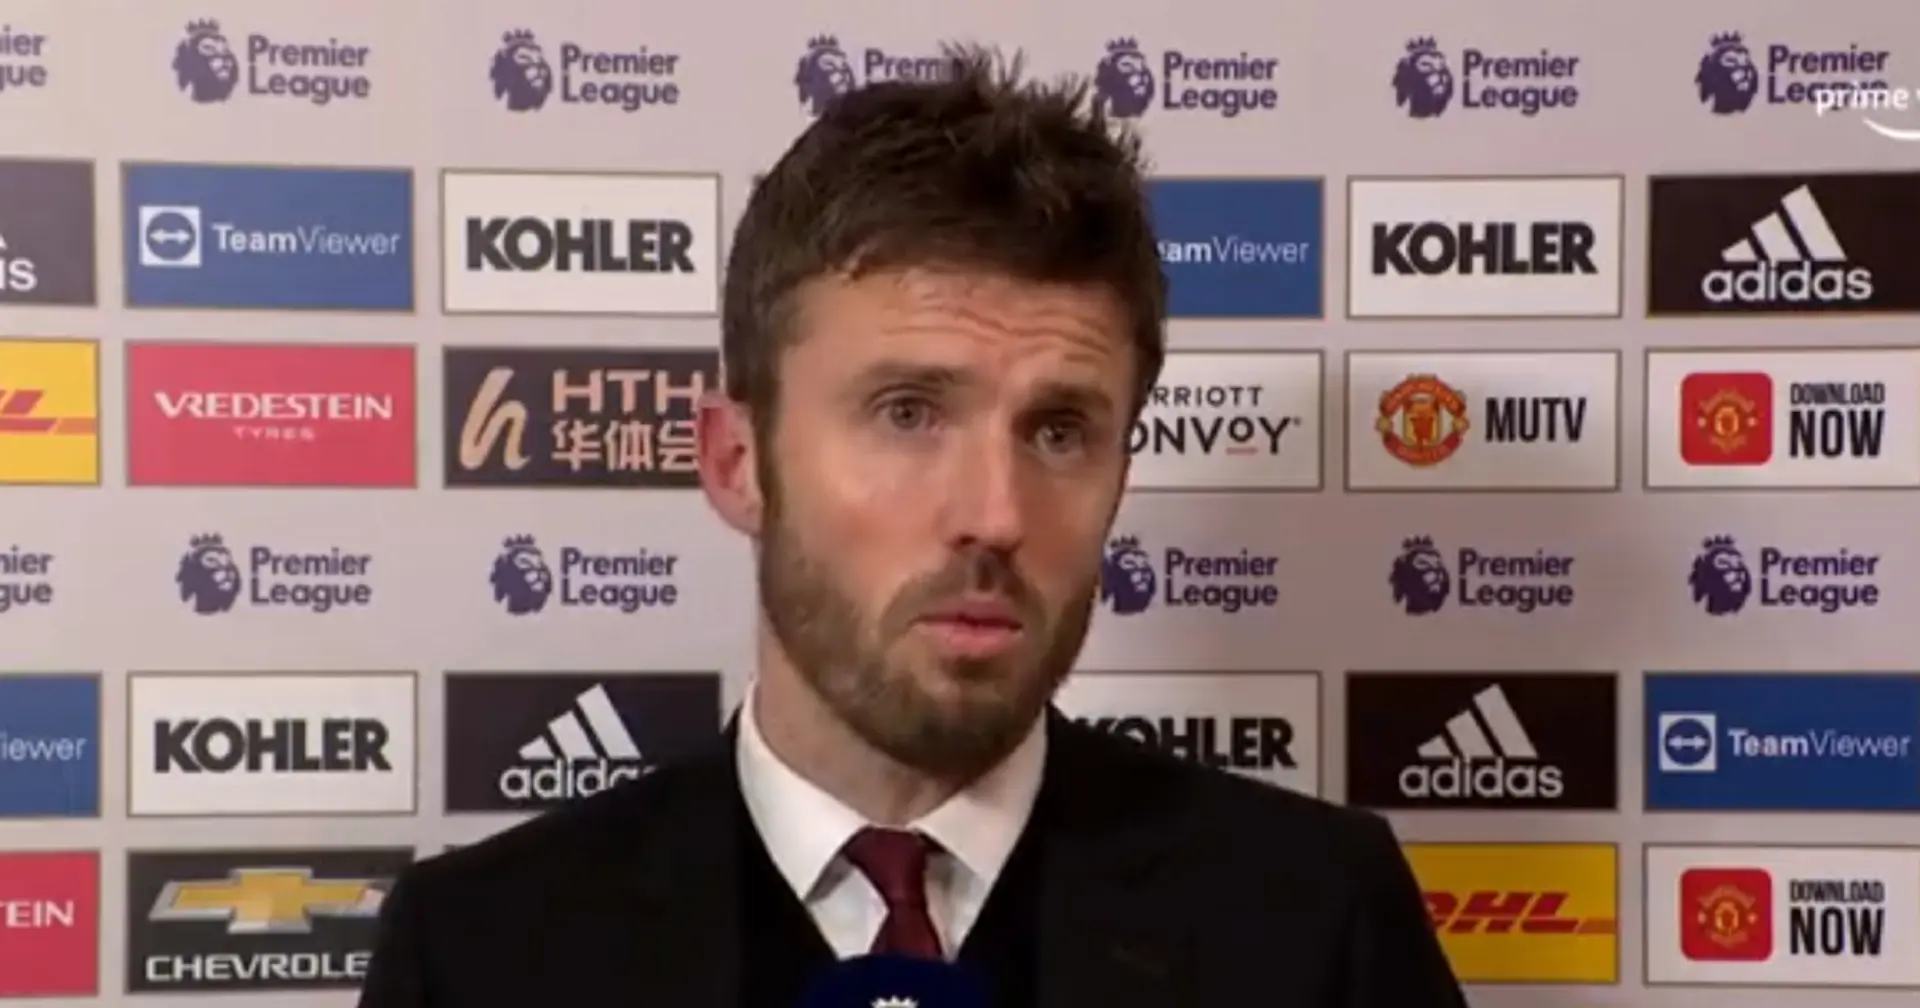 'I just told them 5 minutes ago': Michael Carrick reveals how Man United players reacted to his exit